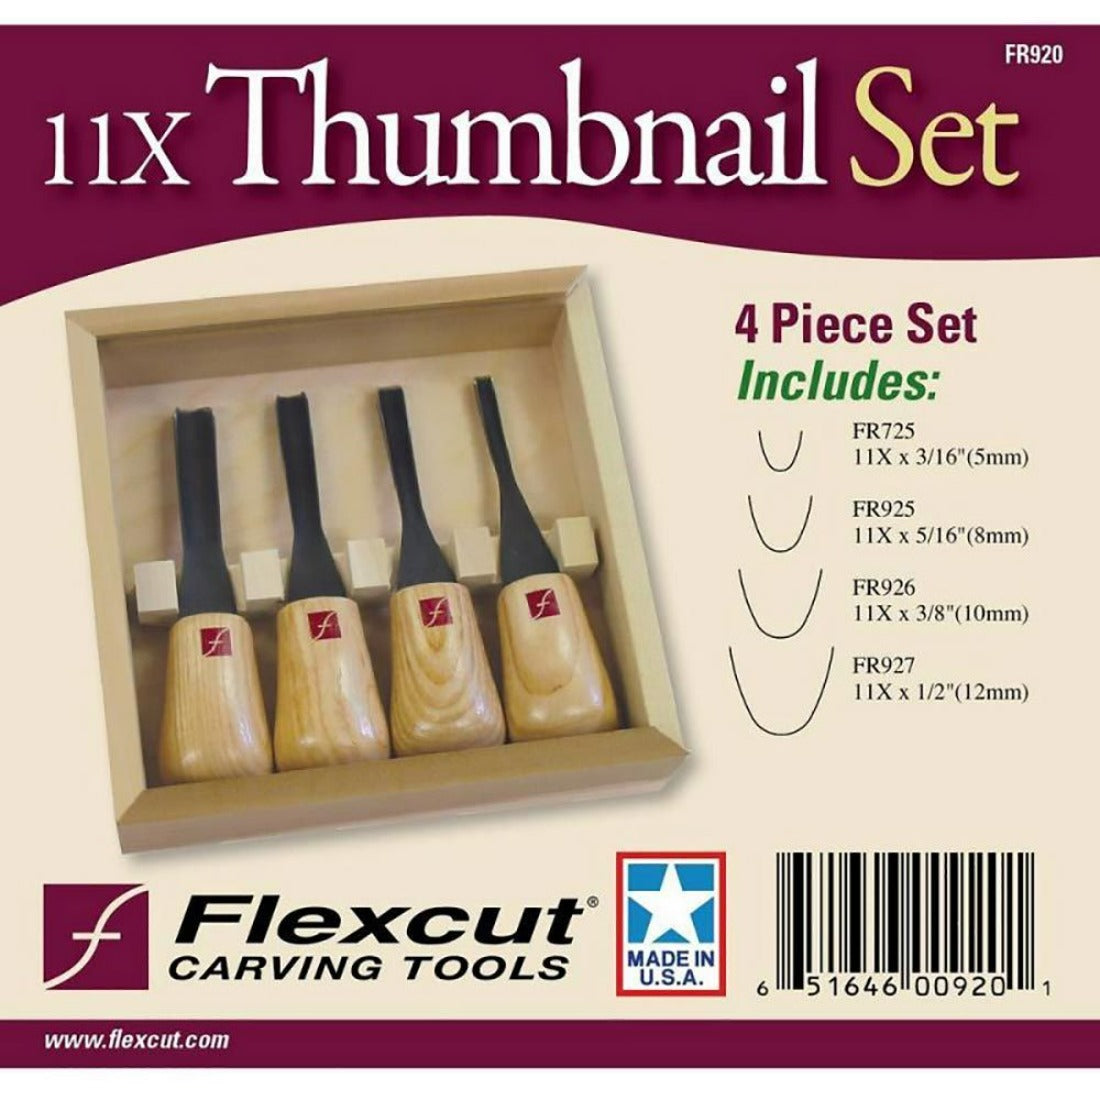 picture of the Flexcut FR920 4pc set leaflet showing the set and profiles of the gouges